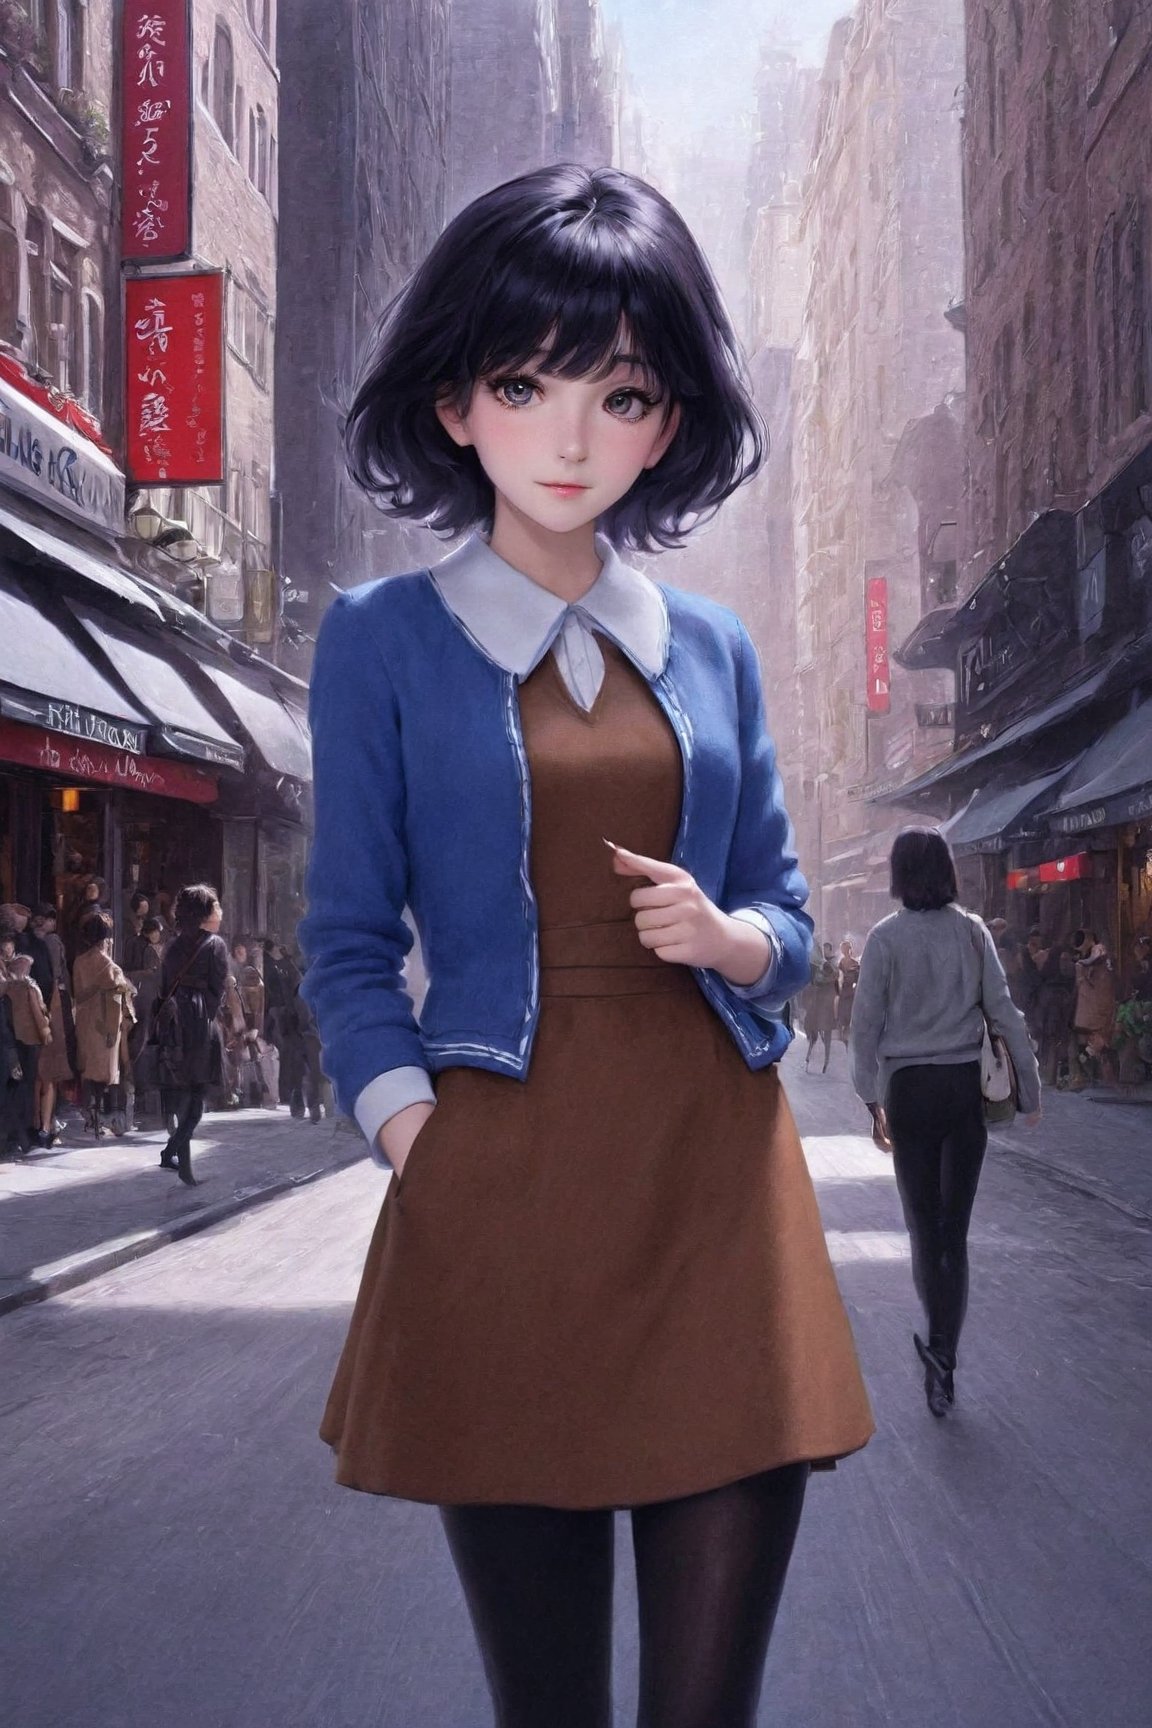 ((Ultra-Detailed)) portrait of a girl wearing a (witchhat),(kuchiki rukia),standing in a busy shoppping street,1 girl,20yo,detailed exquisite face,soft shiny skin,playful smirks,detailed pretty eyes,glossy lips 
BREAK
(backdrop:ultra-detailed shopping street in a big city,many people,cars,blue sky),(girl focus),(fullbody shot)
BREAK 
(sharp focus,high contrast),studio photo,trending on artstation,(ultra-realistic,Super-detailed,intricate details,HDR,8K),chiaroscuro lighting,vibrant colors,by Karol Bak,Gustav Klimt and Hayao Miyazaki,
(inkycapwitchyhat),real_booster,photo_b00ster,art_booster,ani_booster